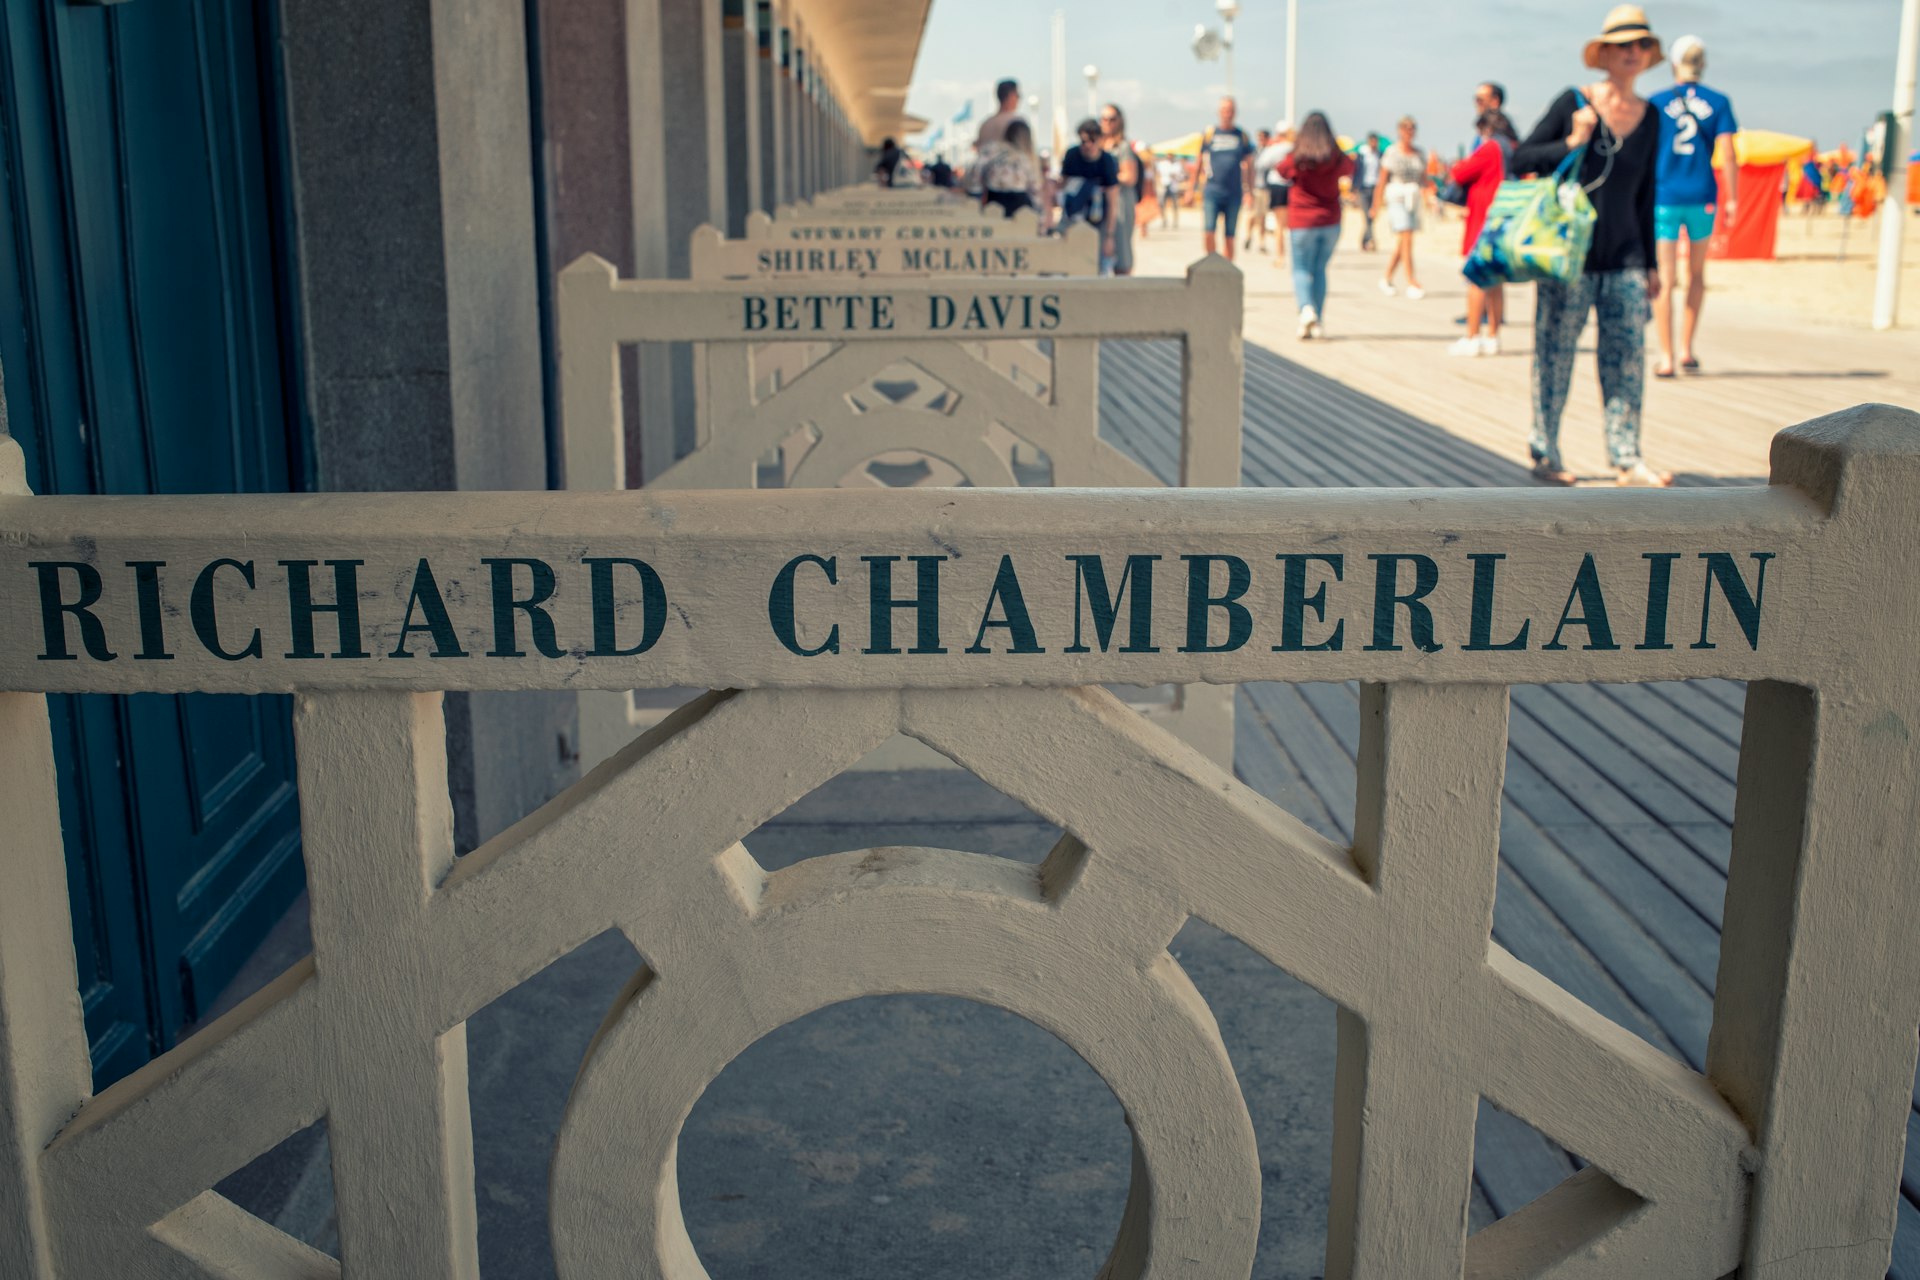 A close-up of a wooden barrier with the name Richard Chamberlain on it outside an art deco beach hut on a boardwalk by the sand